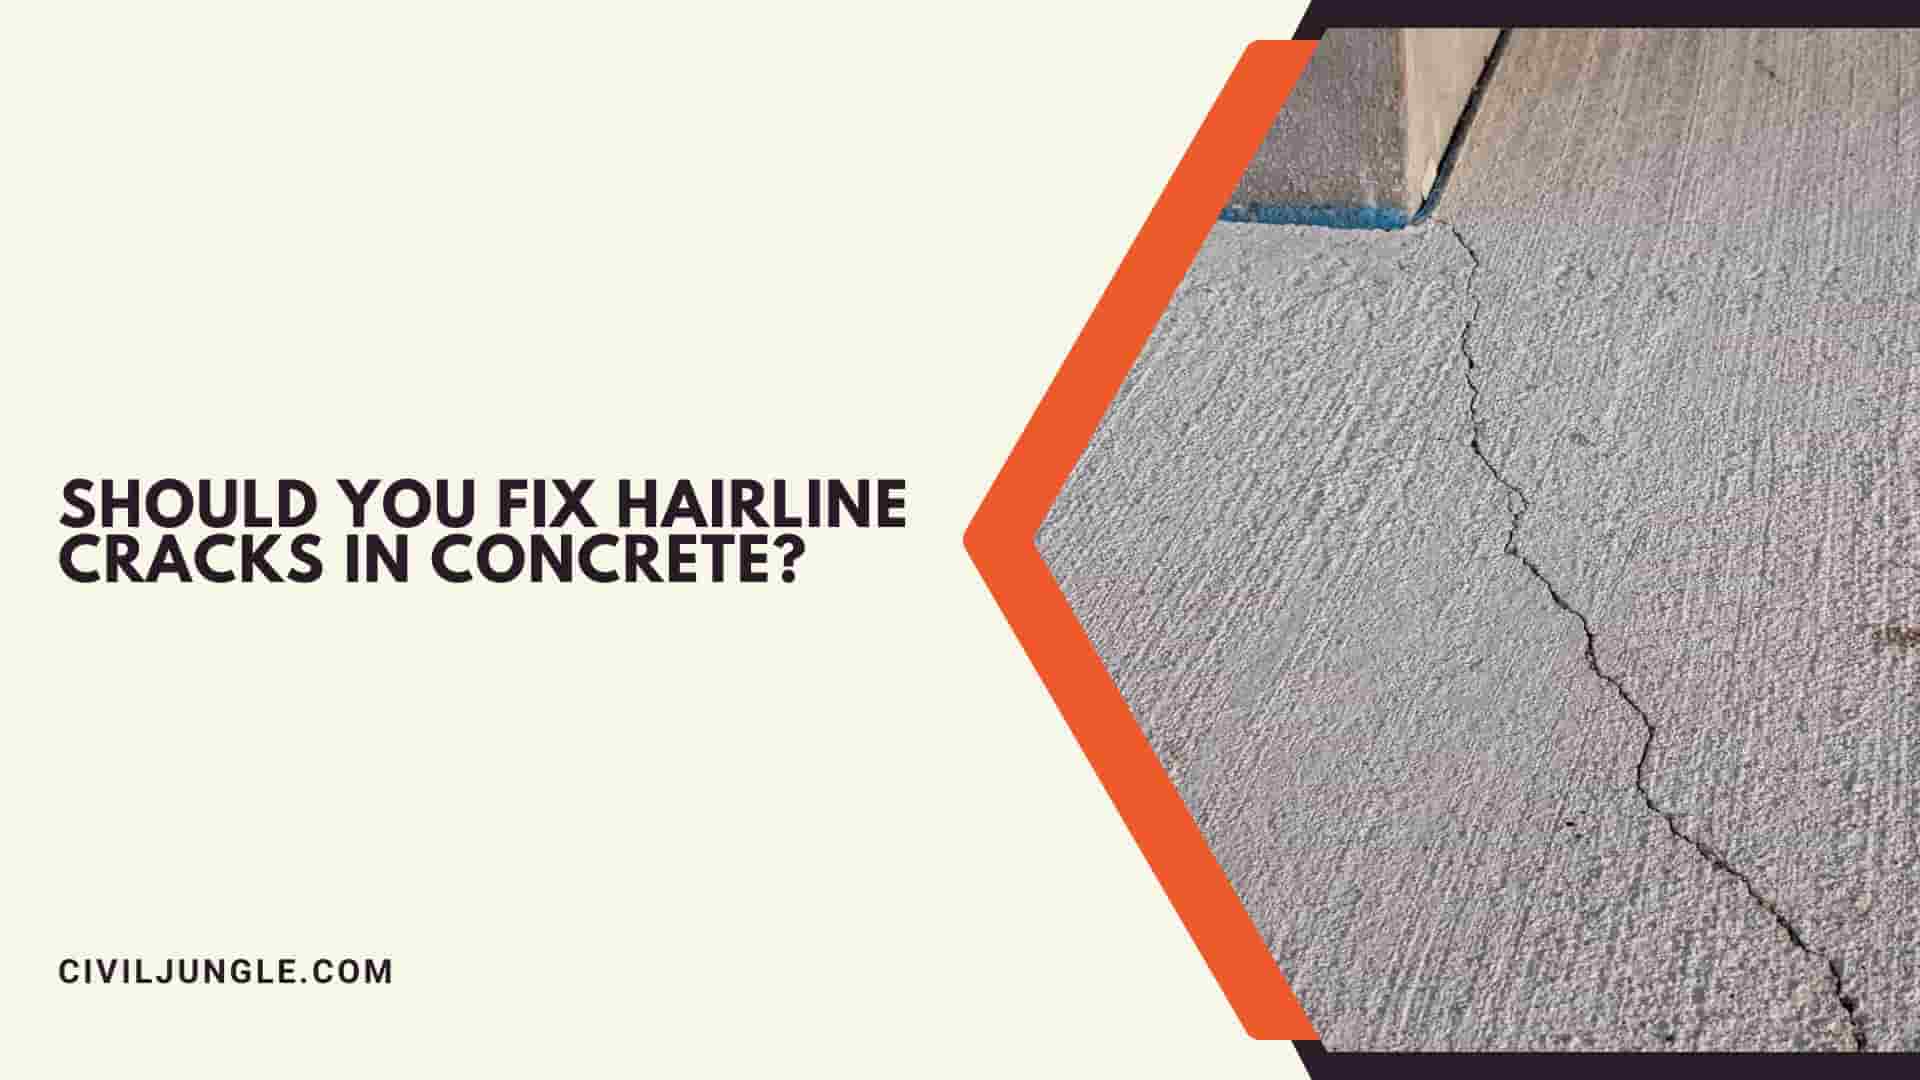 Should You Fix Hairline Cracks In Concrete?